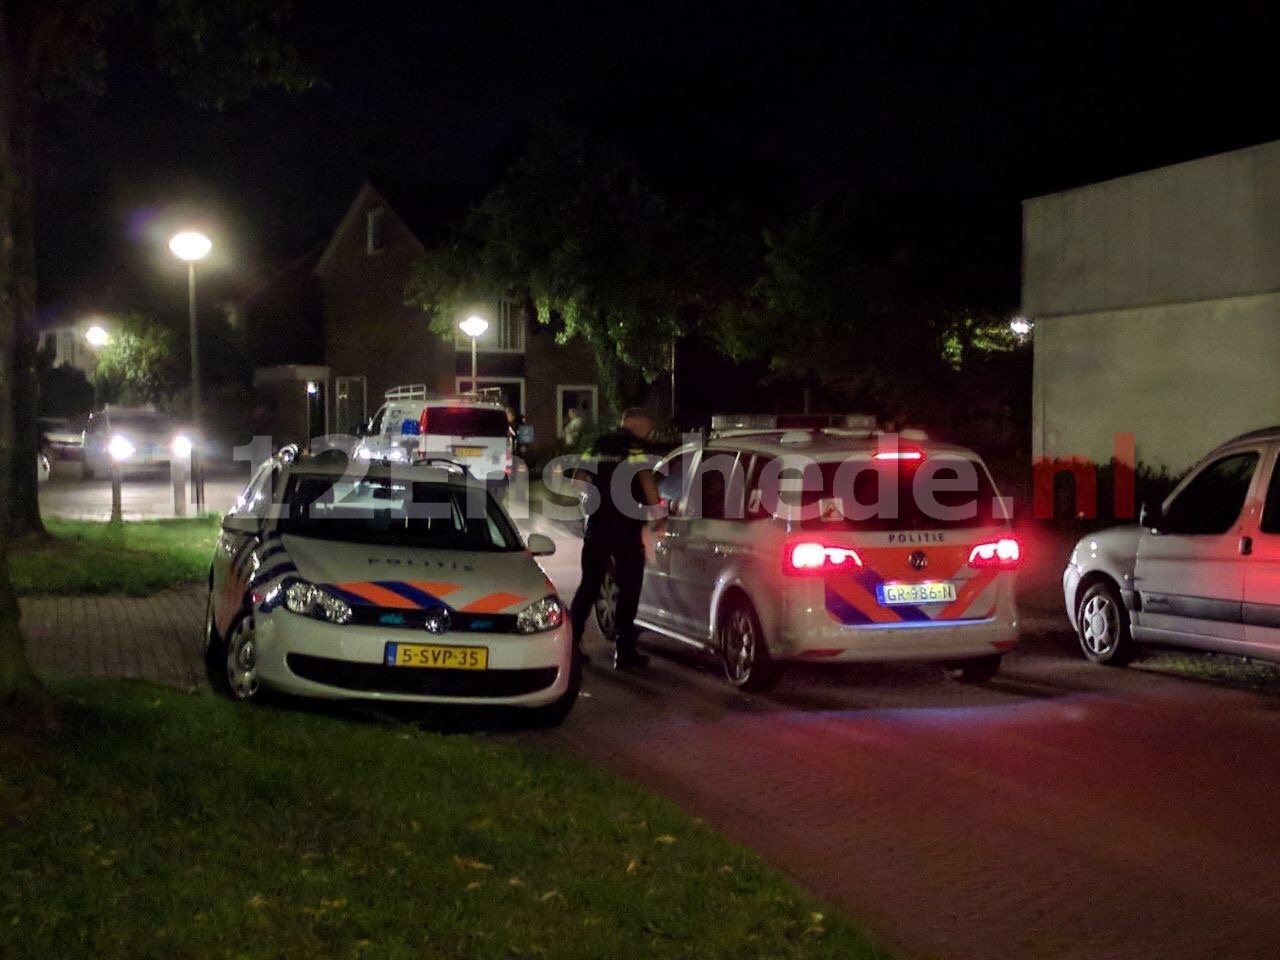 Overval op pizzabezorger in Enschede